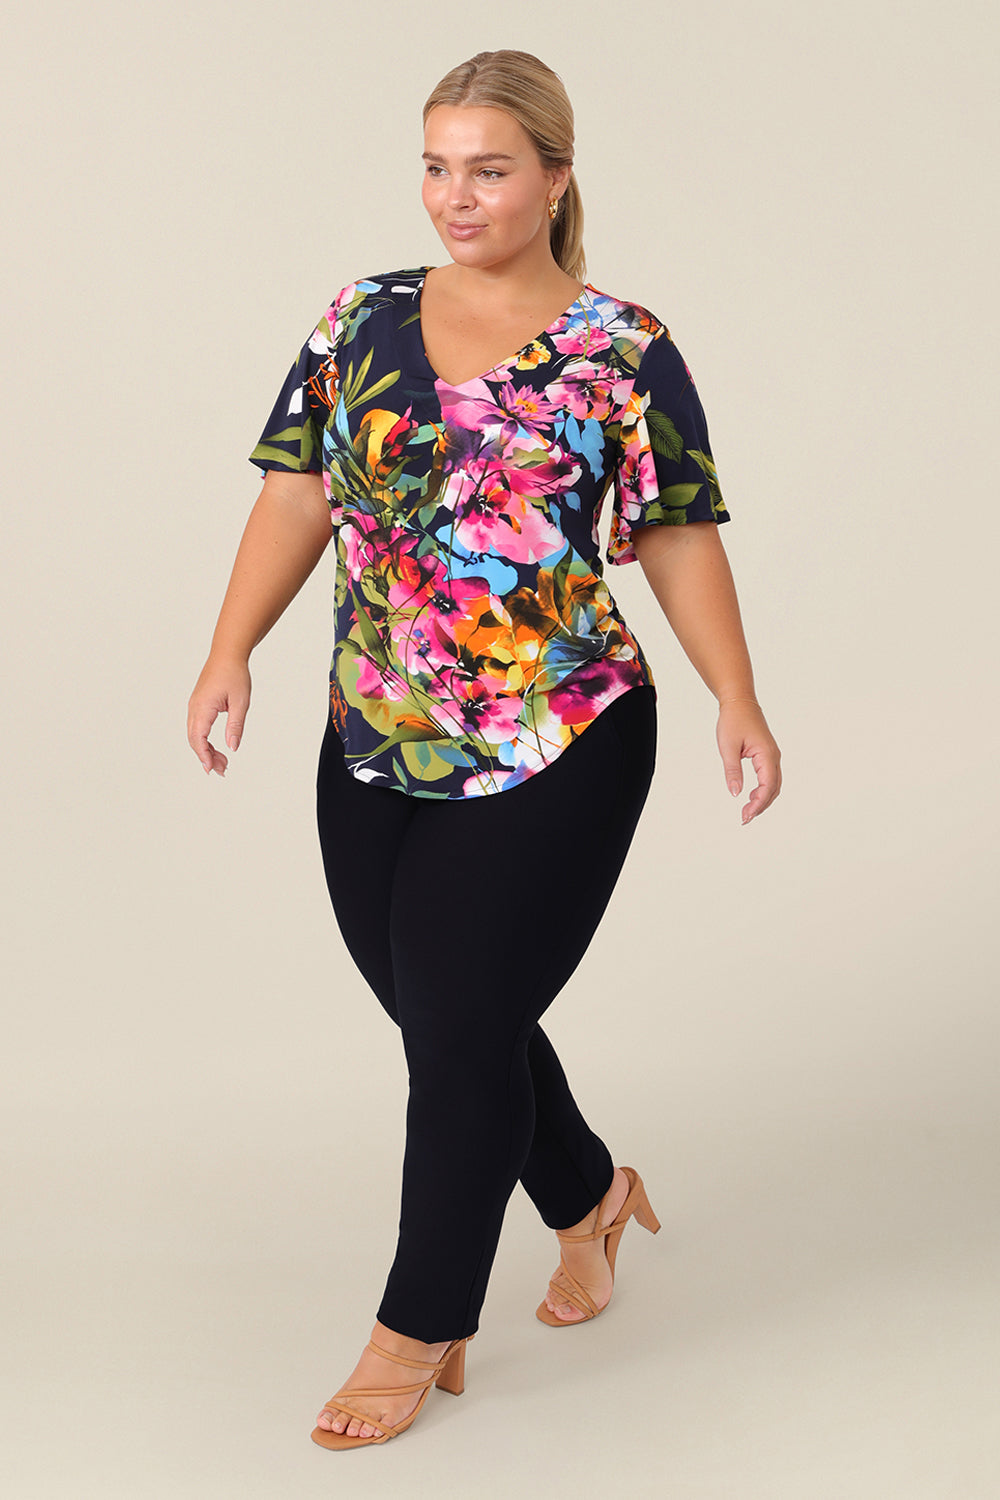 A plus size, size 14 woman wears a V-neck floral top with short flutter sleeves. Made from dry-touch jersey, and styled with a fitted navy trouser,this top is comfortable for everyday style. Designed and made in Australia for petite to plus size women.